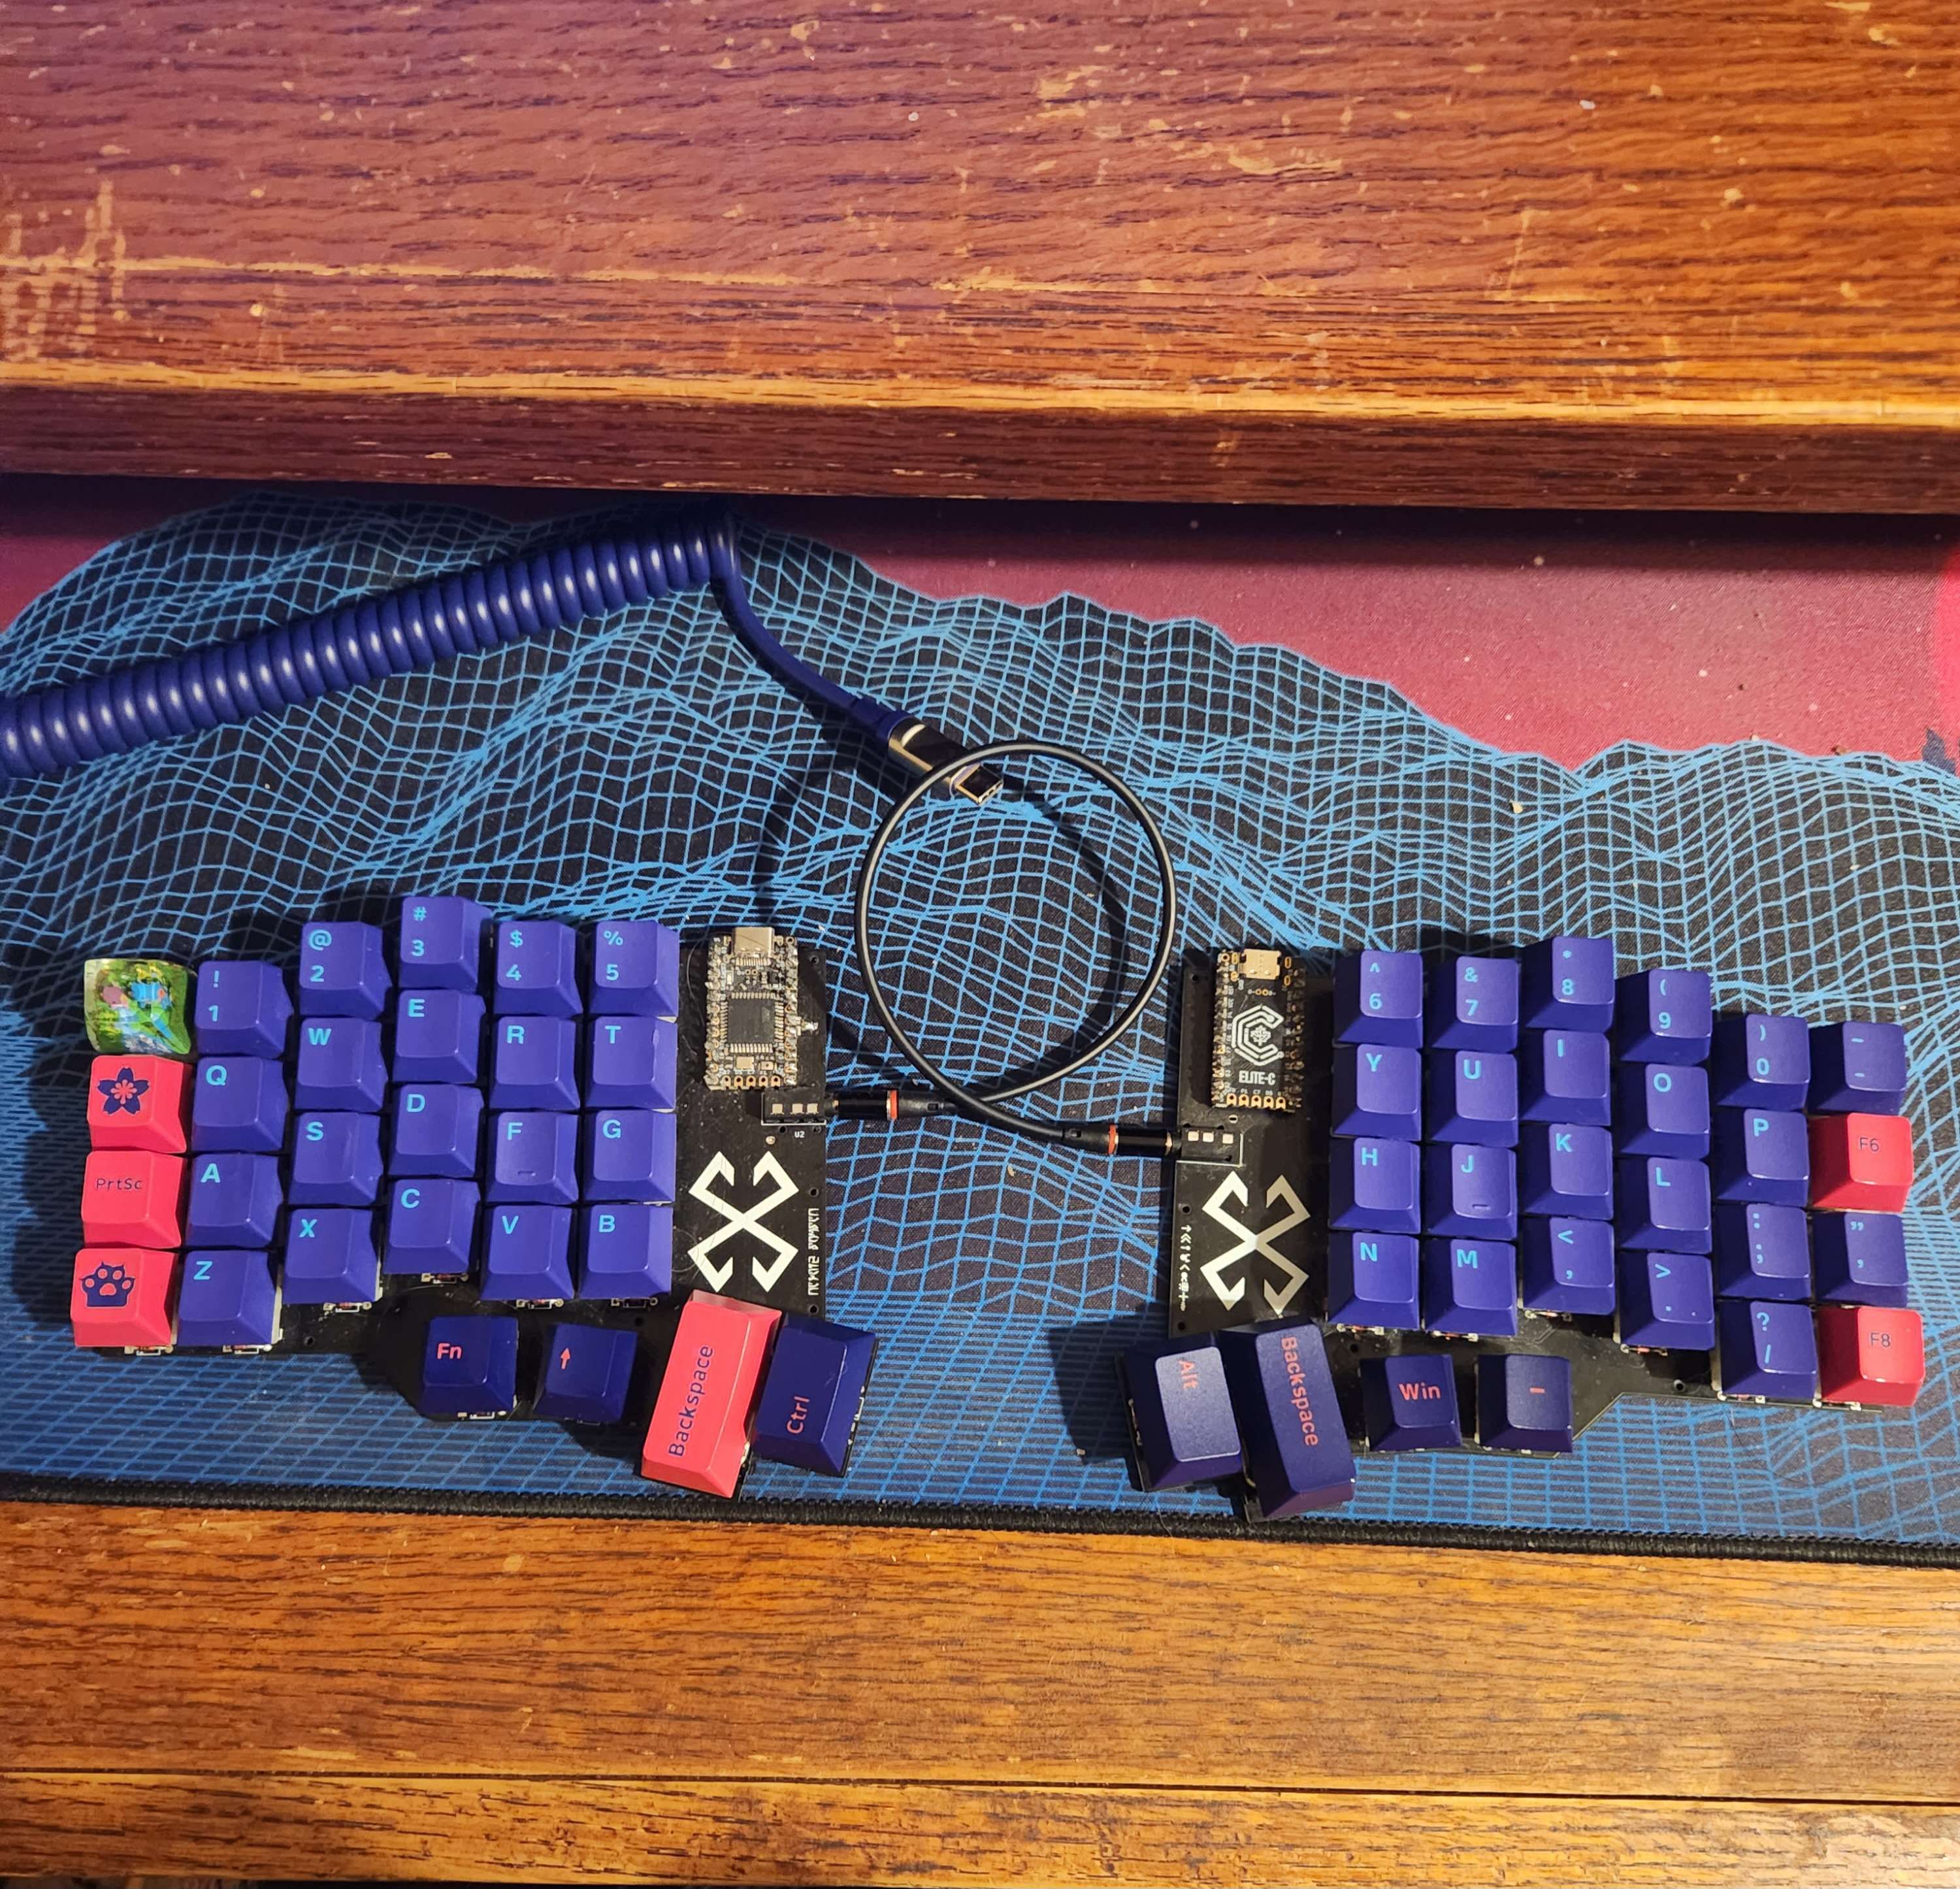 A split, column-staggered, ortholinear keyboard with AKKO Neon keycaps and an artisan mudkip keycap in the place of the grave and escape key.